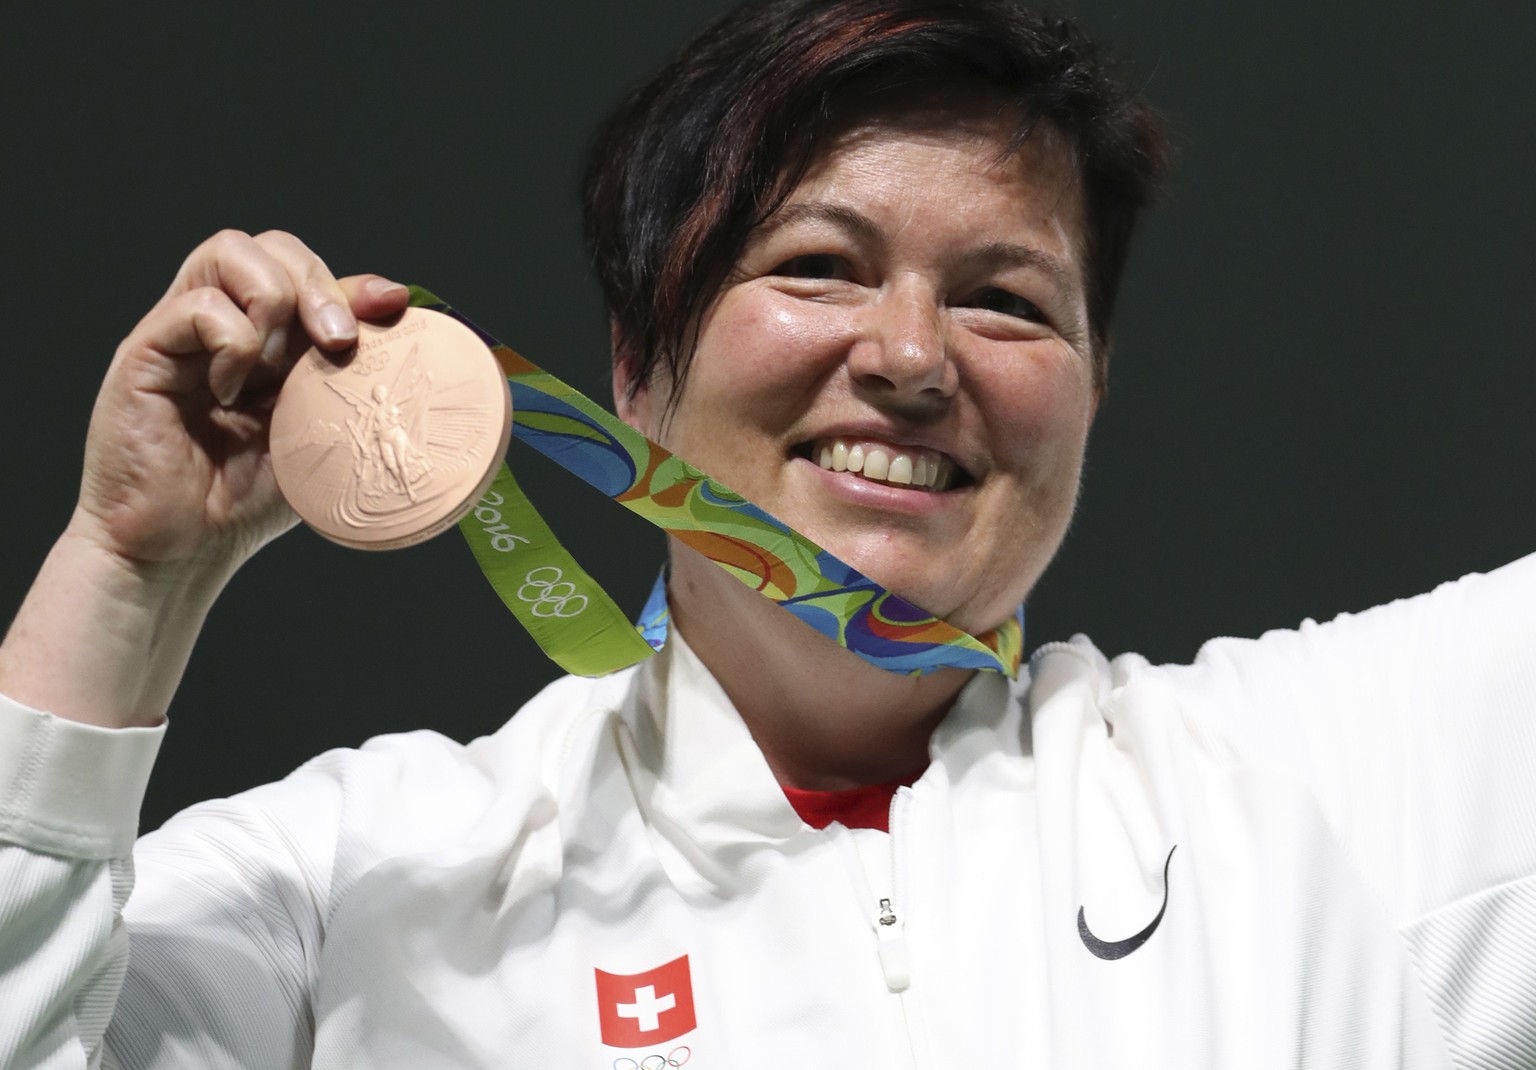 Heidi Diethelm Gerber of Switzerland celebrates for the bronze medal during the award ceremony for the women&#039;s 25 meter pistol competition at Olympic Shooting Center at the 2016 Summer Olympics i ...